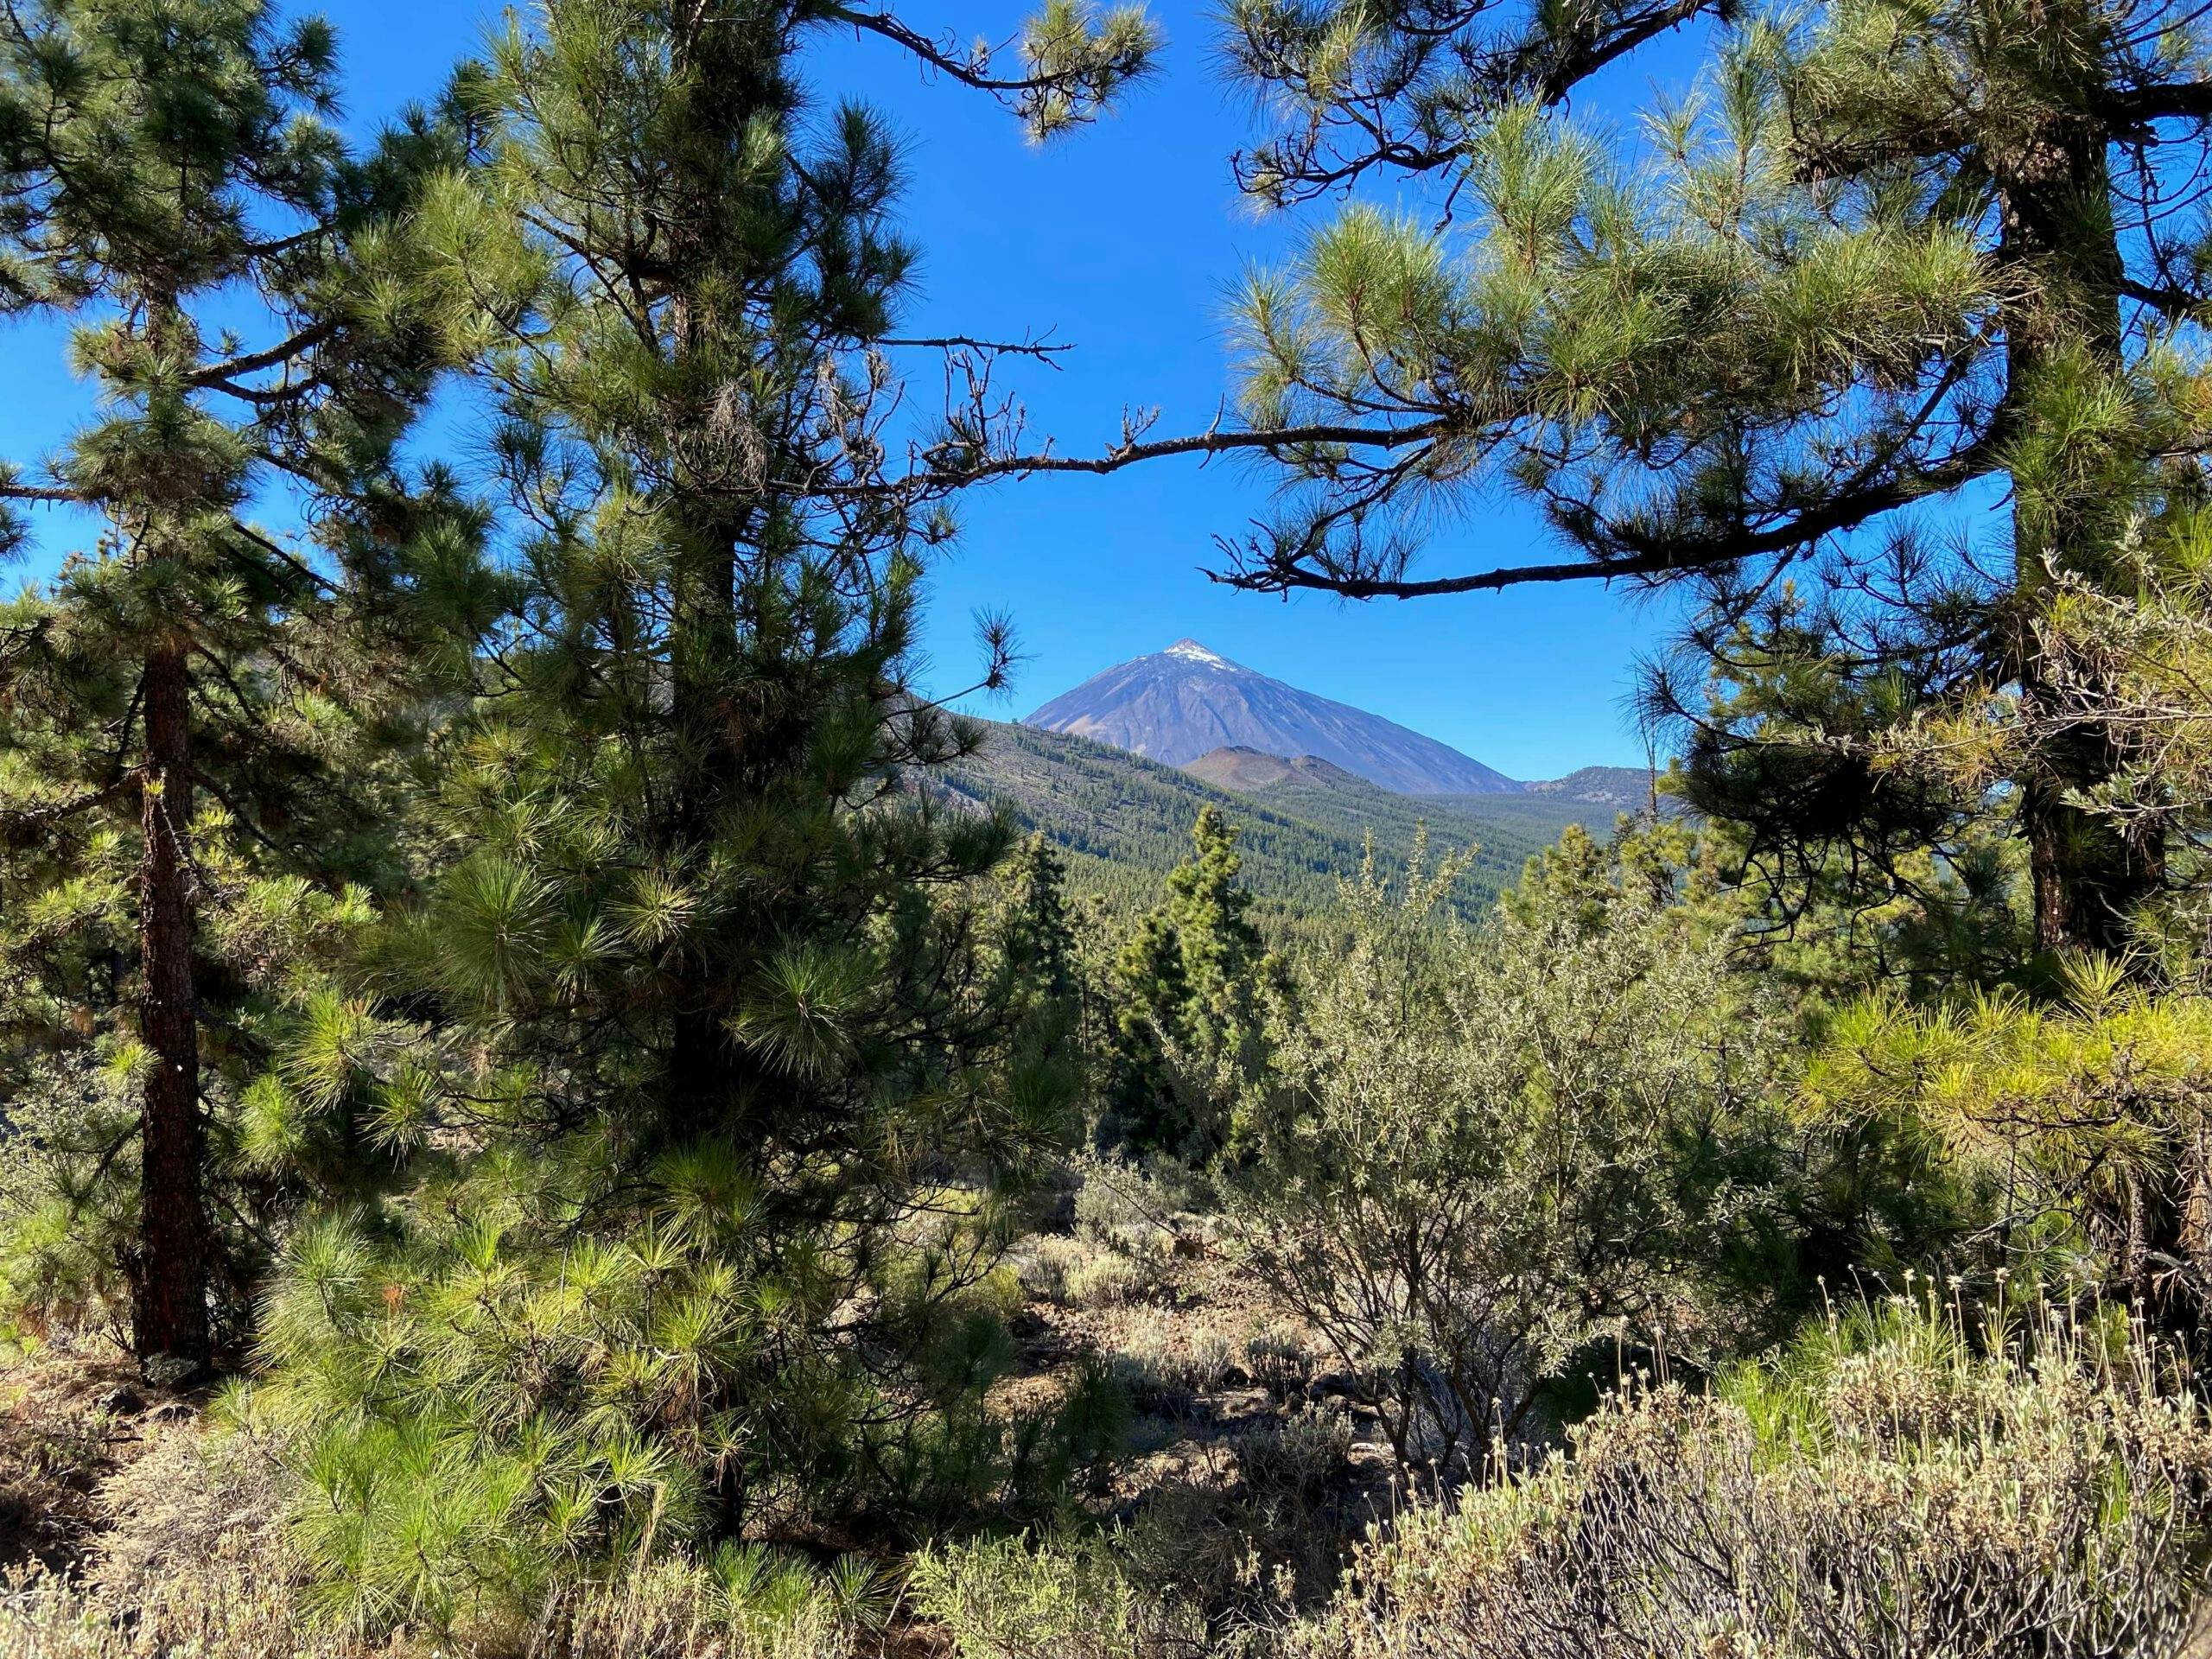 View of the Teide from the ascent path